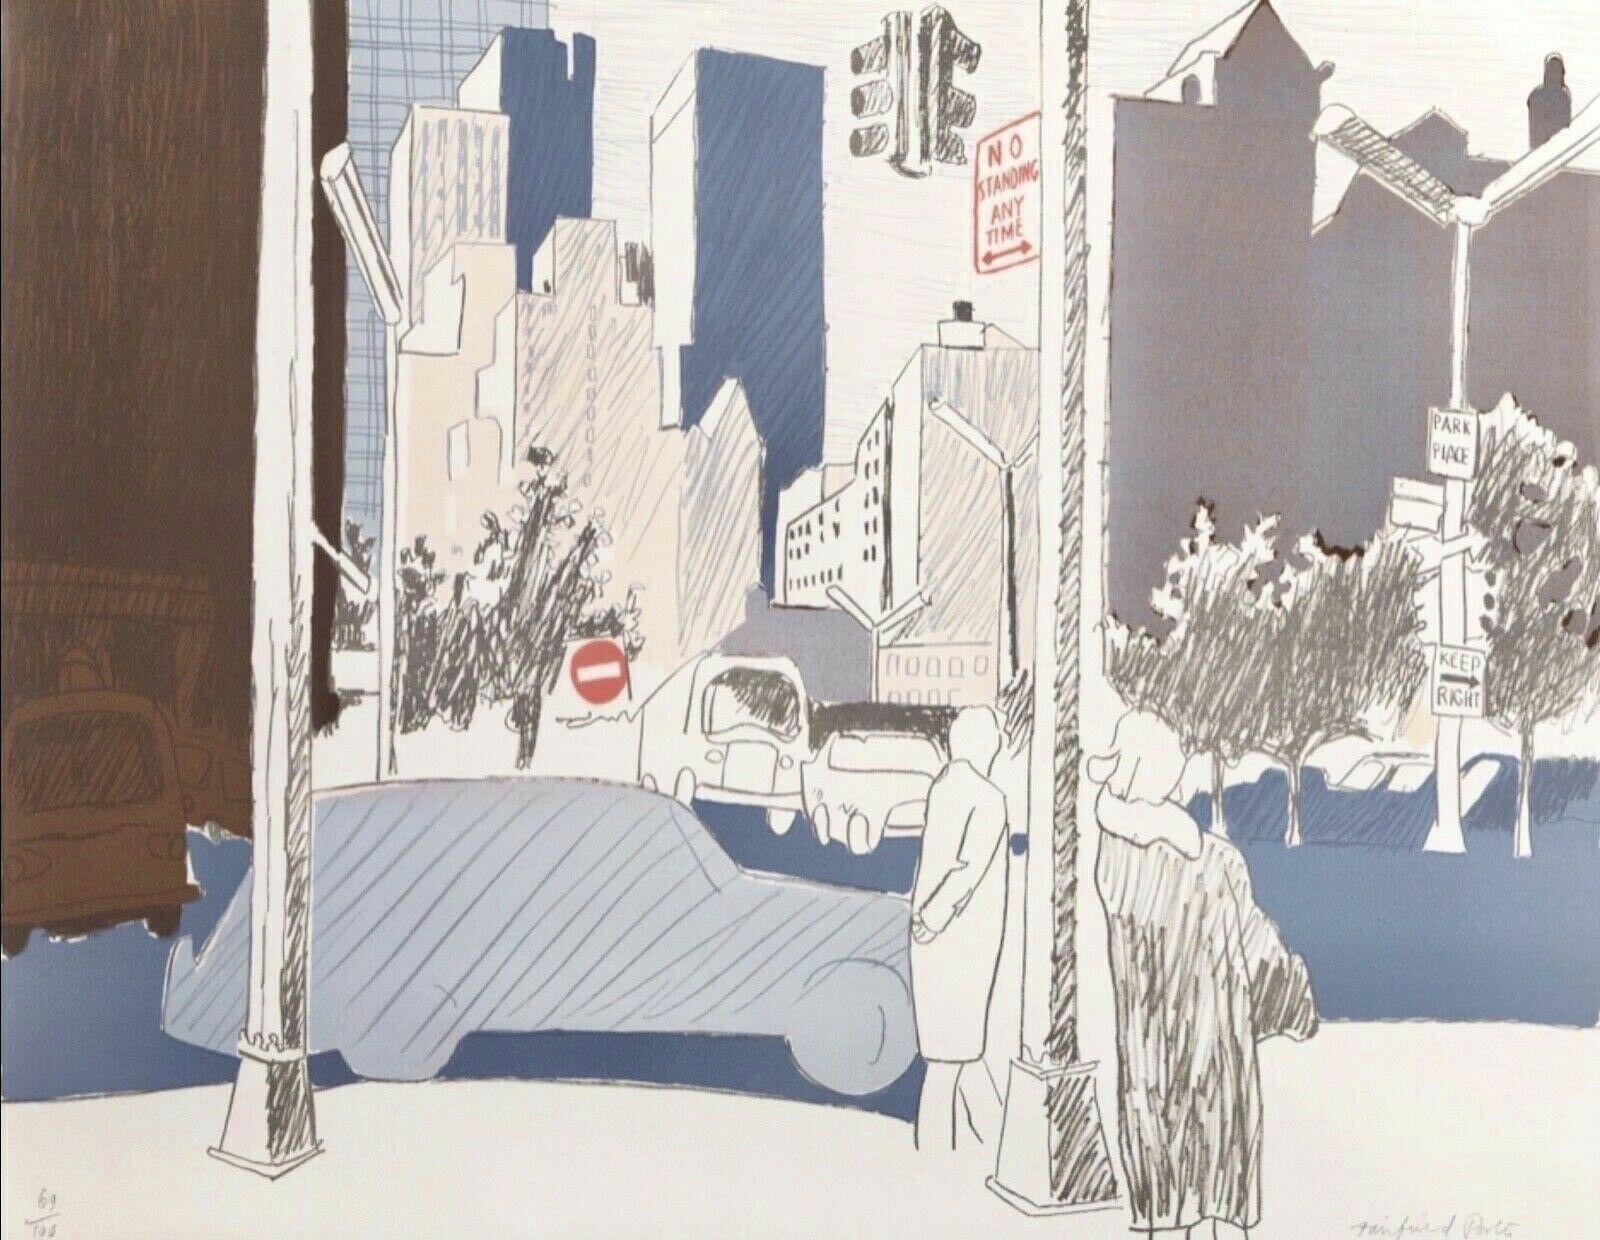 Artist: Fairfield Porter (1907-1975)
Title: Street Scene (L.18)
Year: 1969
Medium: Lithograph on Arches paper
Edition: 69/100, plus proofs
Size: 22.25 x 30 inches
Condition: Excellent
Inscription: Signed and numbered by the artist
Notes: Published